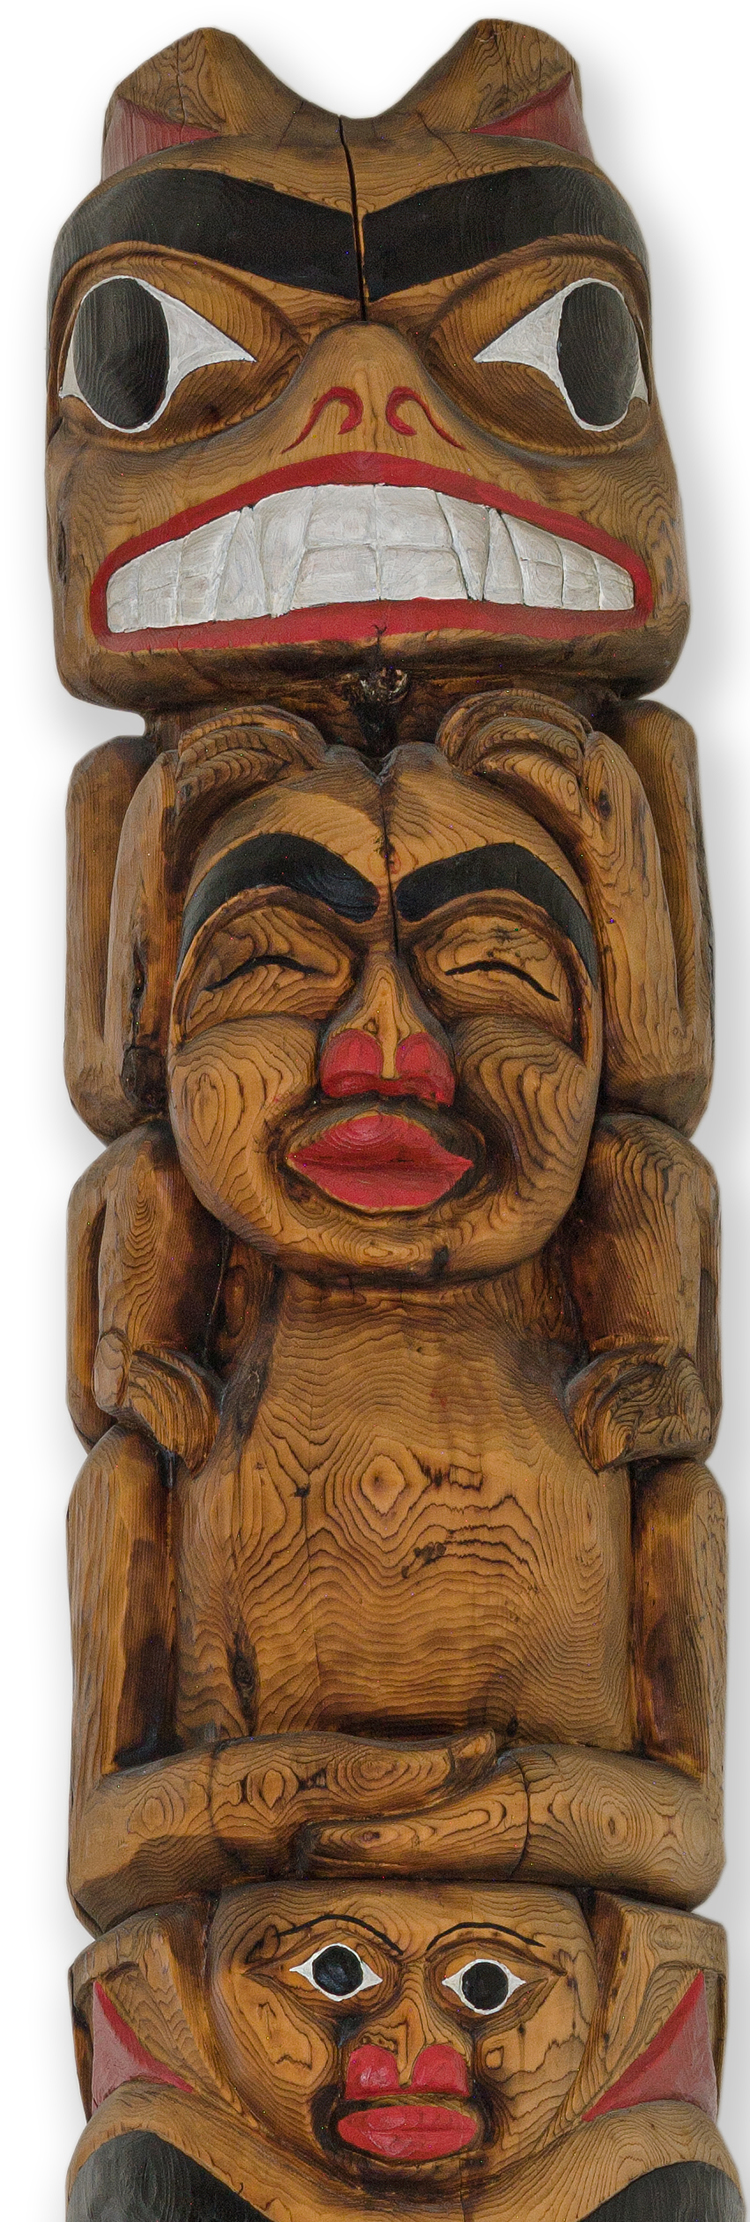 Pacific Northwest Coast Style Totem by Bill Bouchard